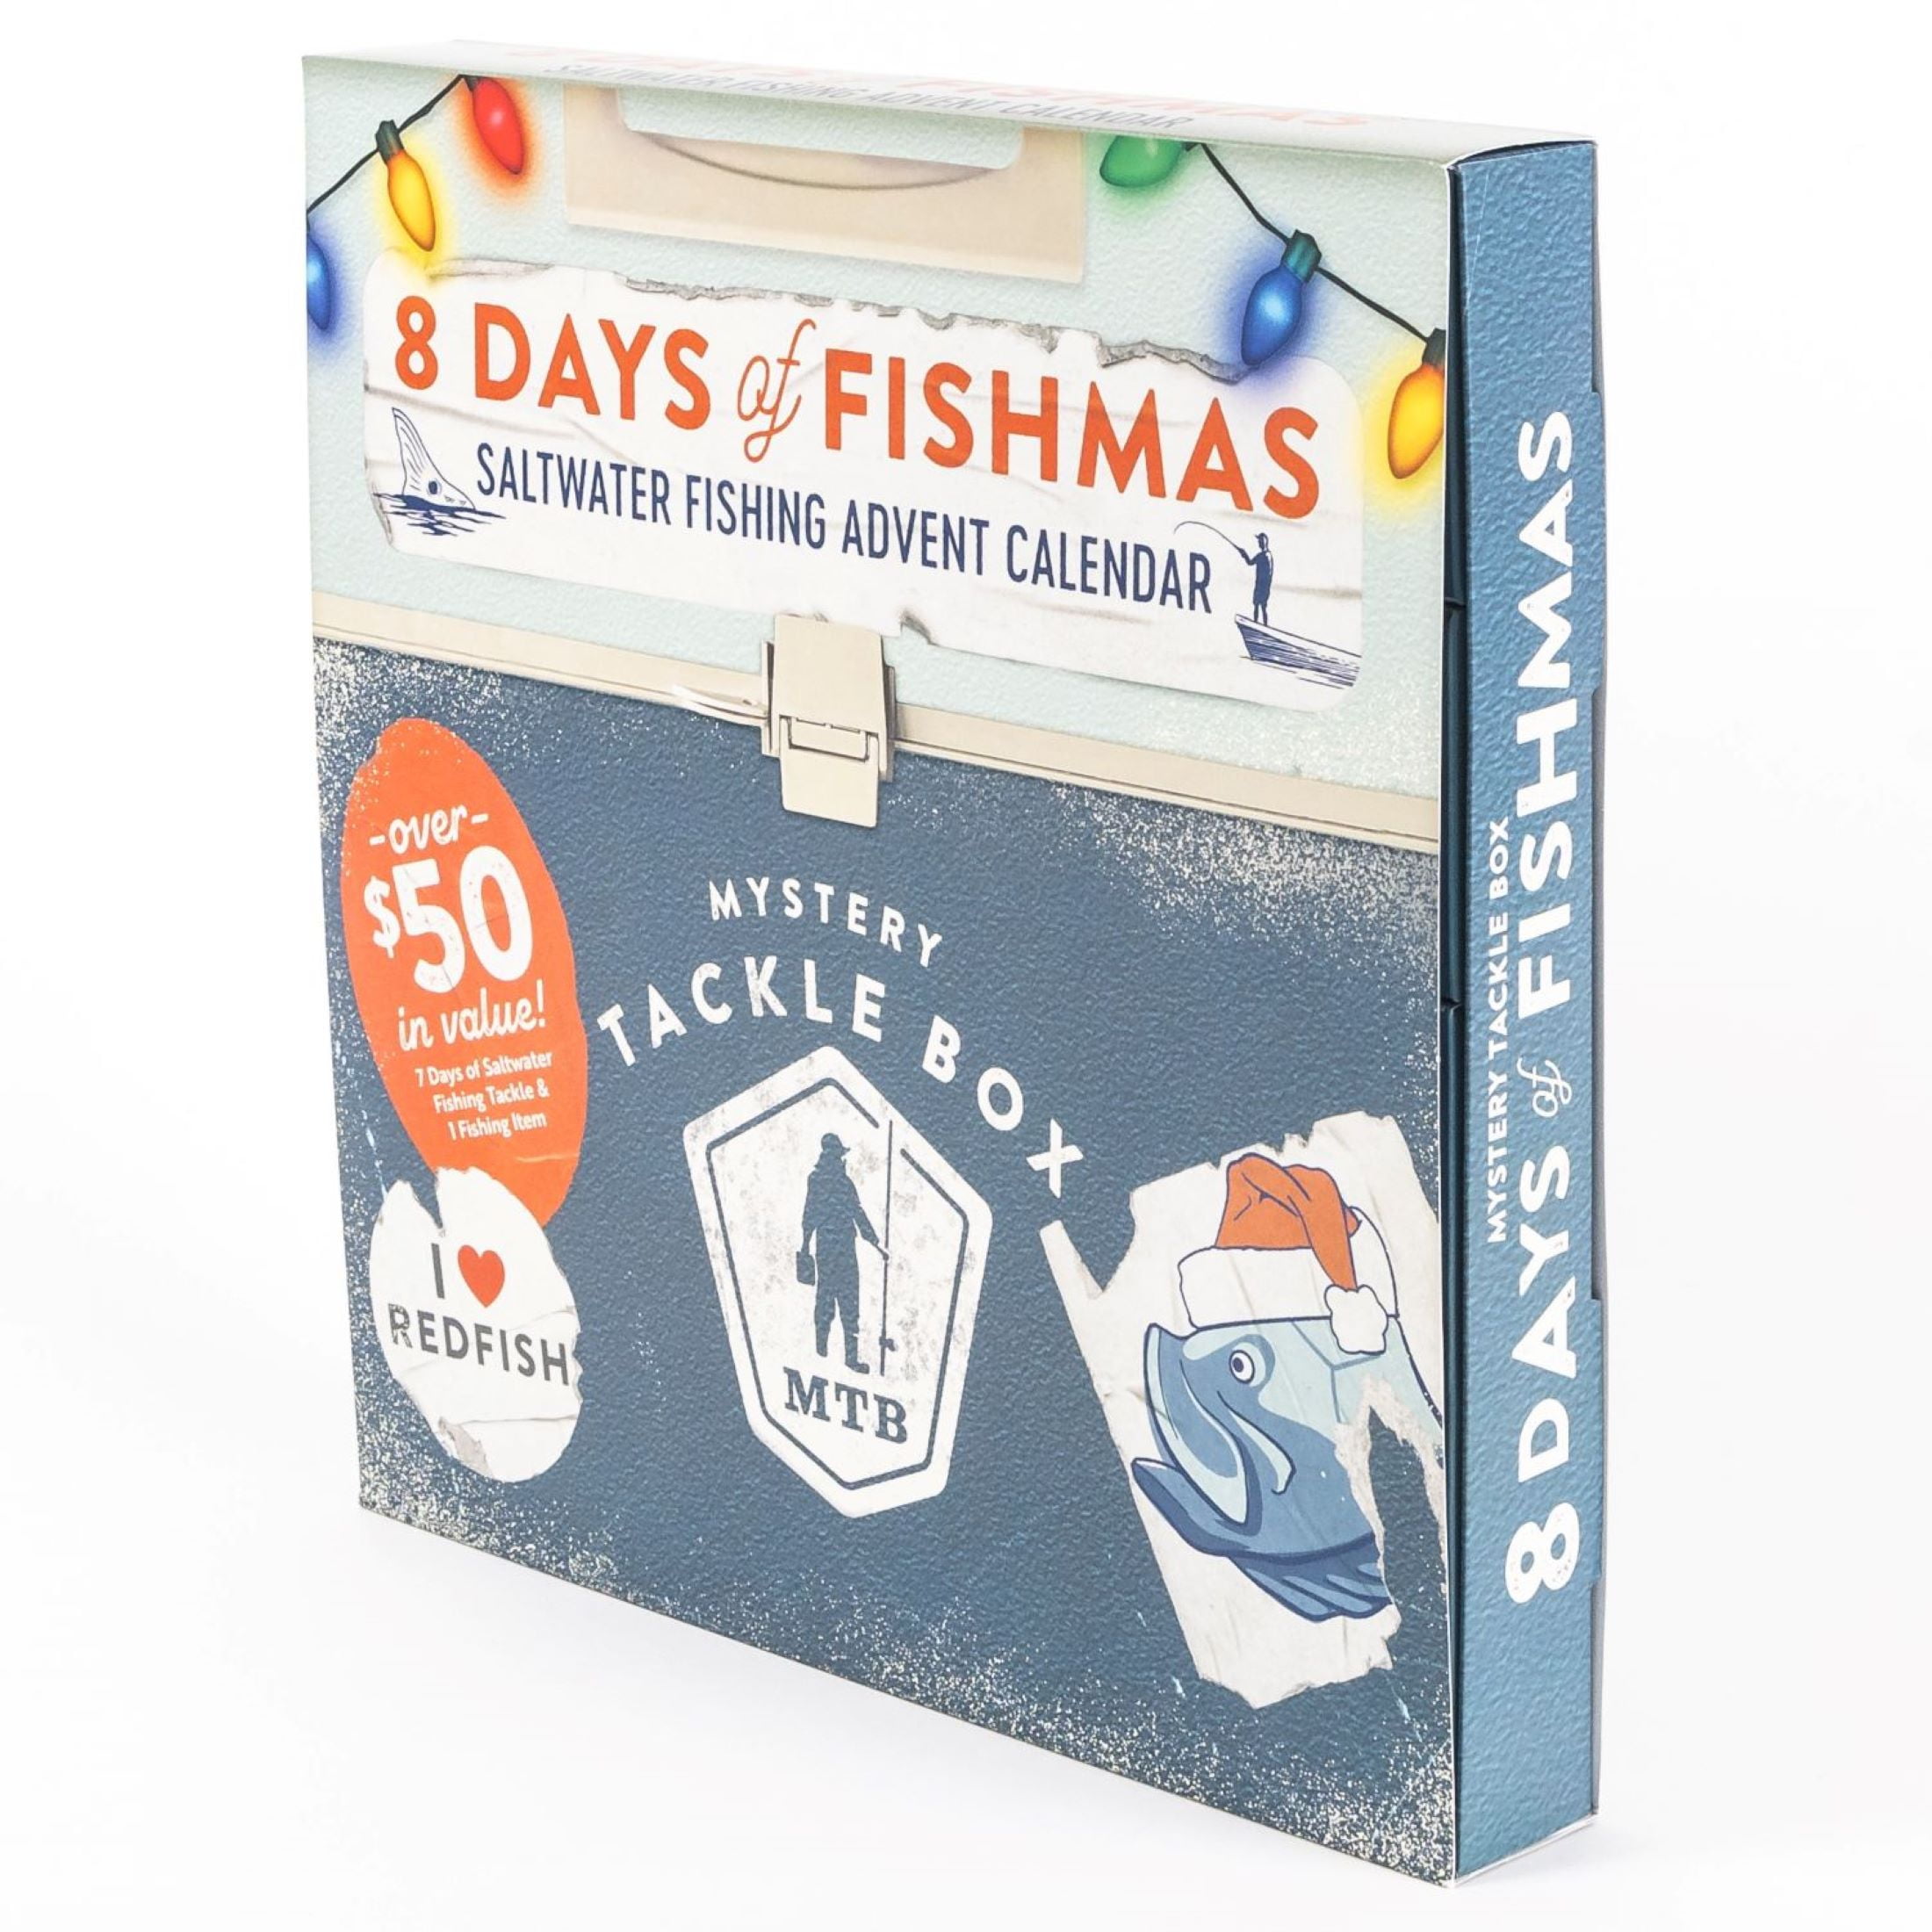 We can't wait to see what's in our Mystery Tackle Box 12 Days of Fishm